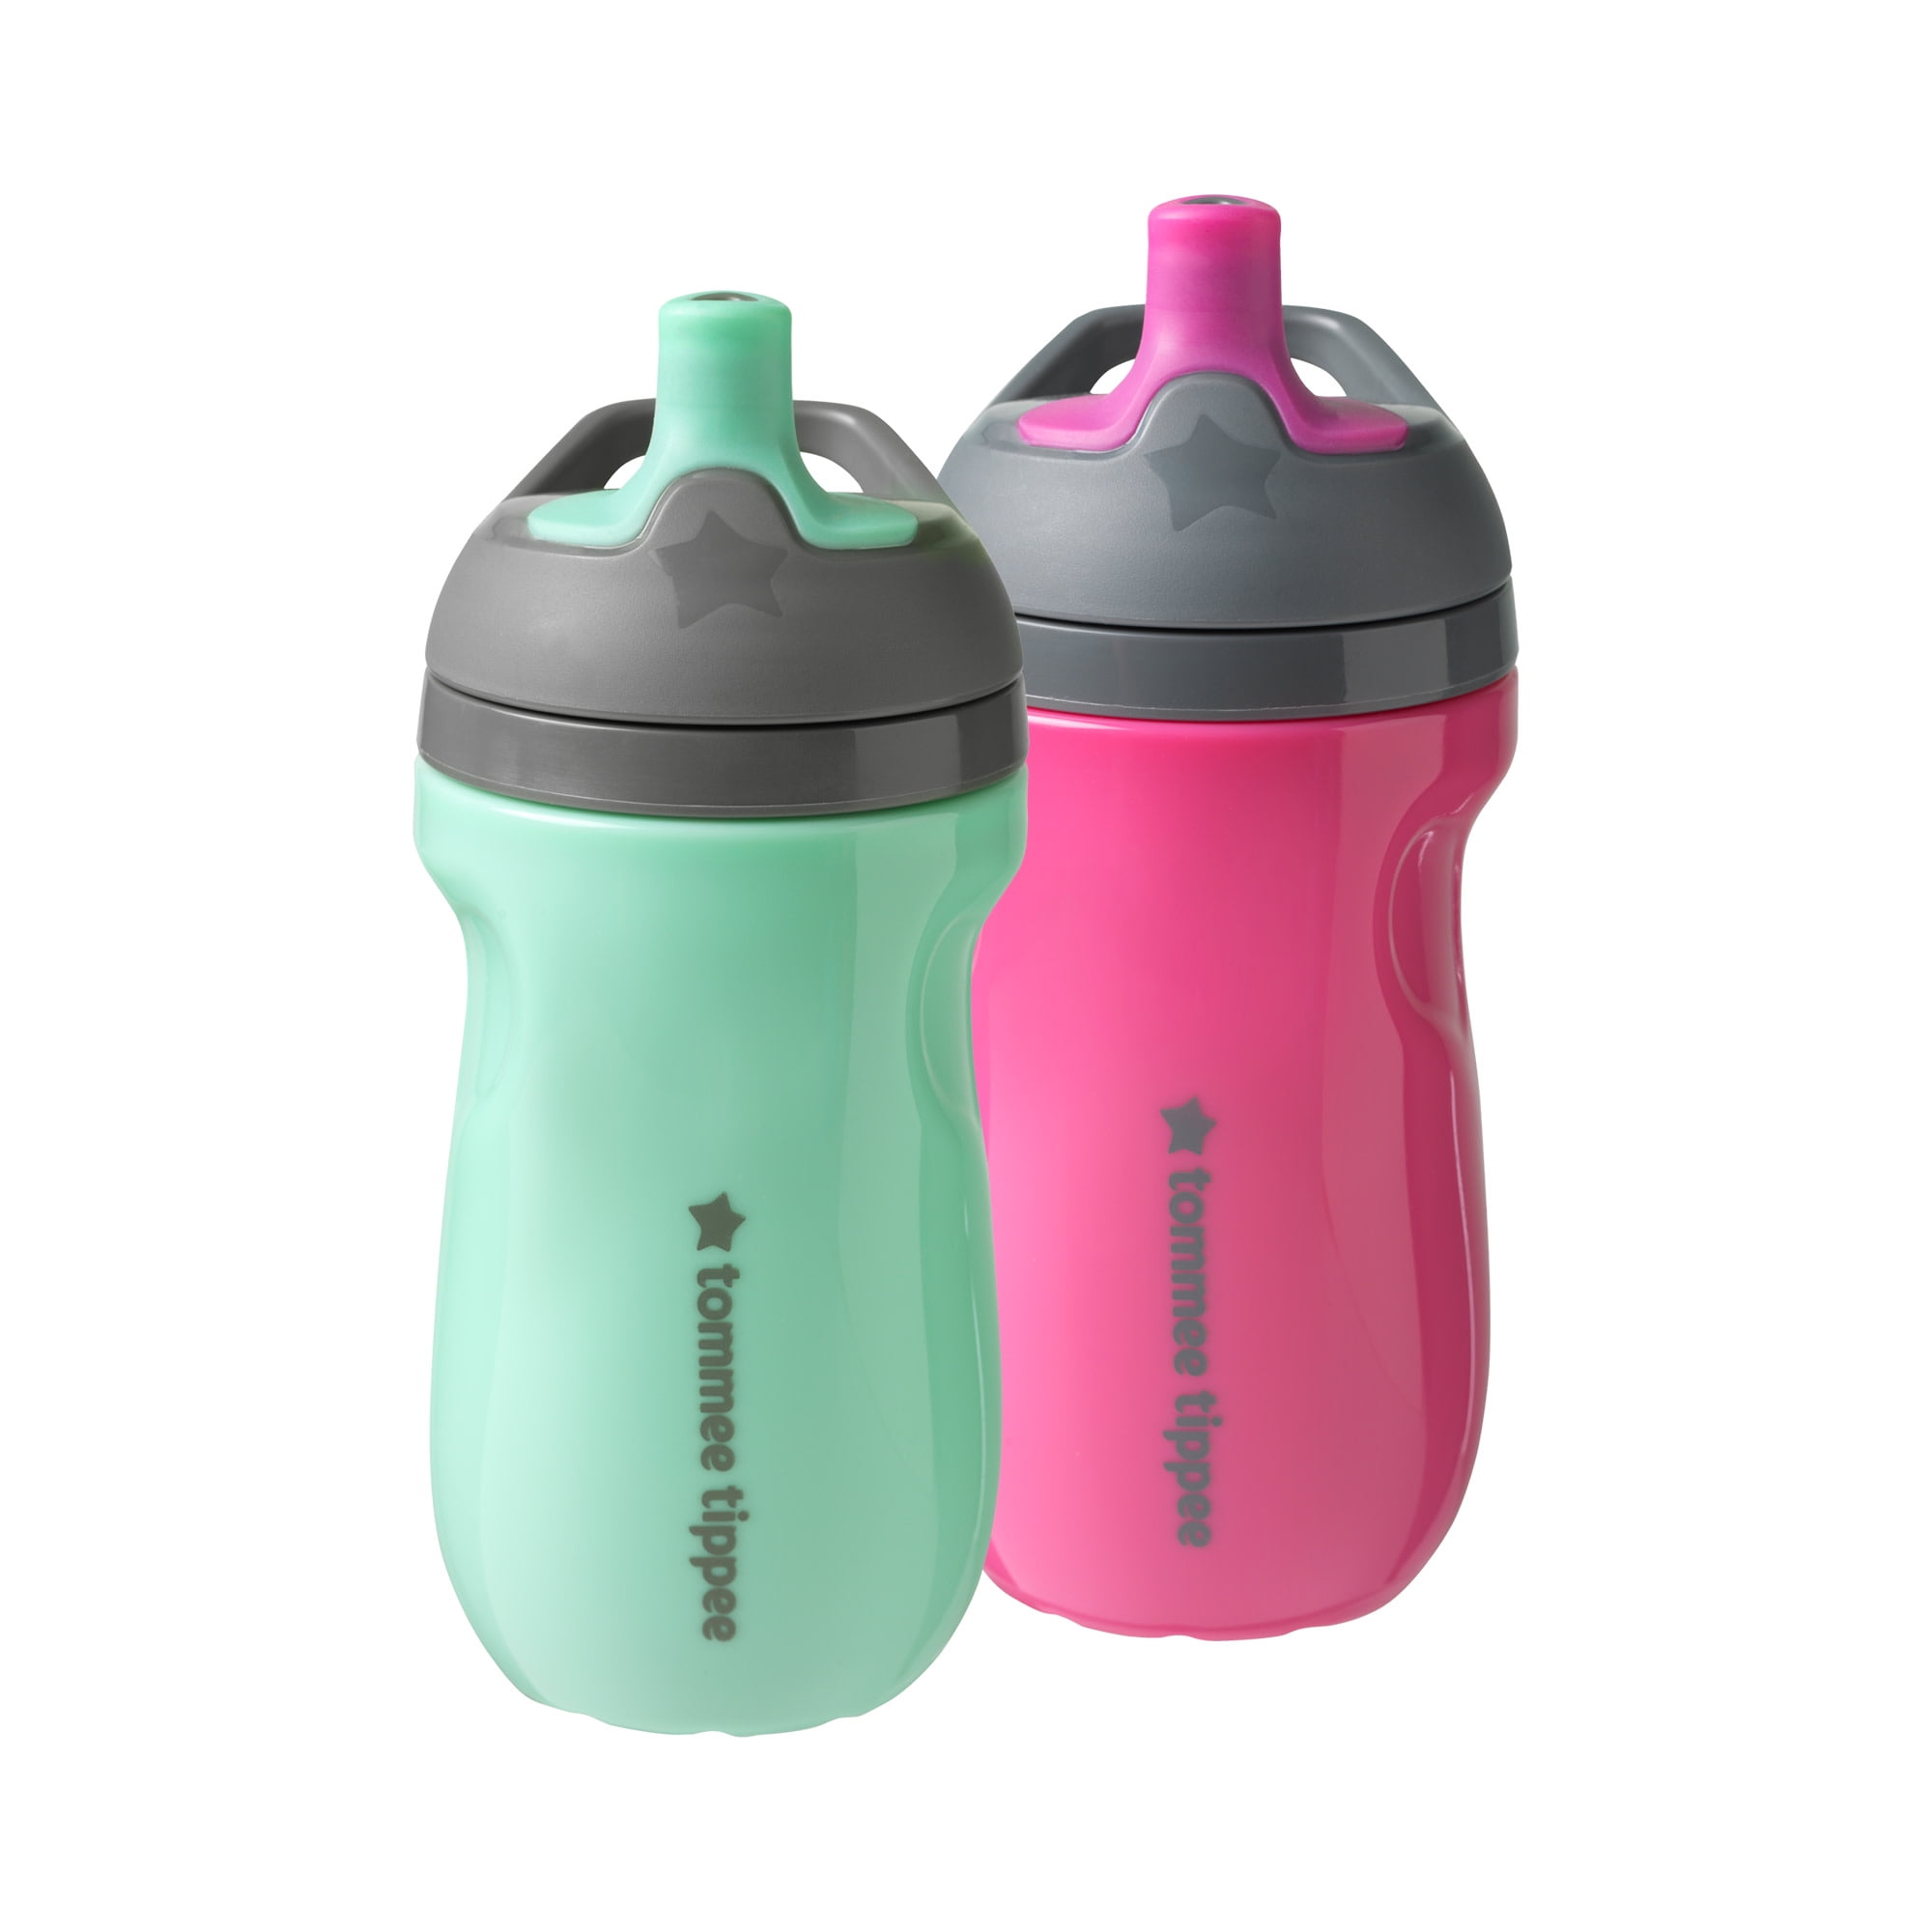 Tommee Tippee Insulated Straw Cup - Pink & Mint - 9 Ounce - 2 ct